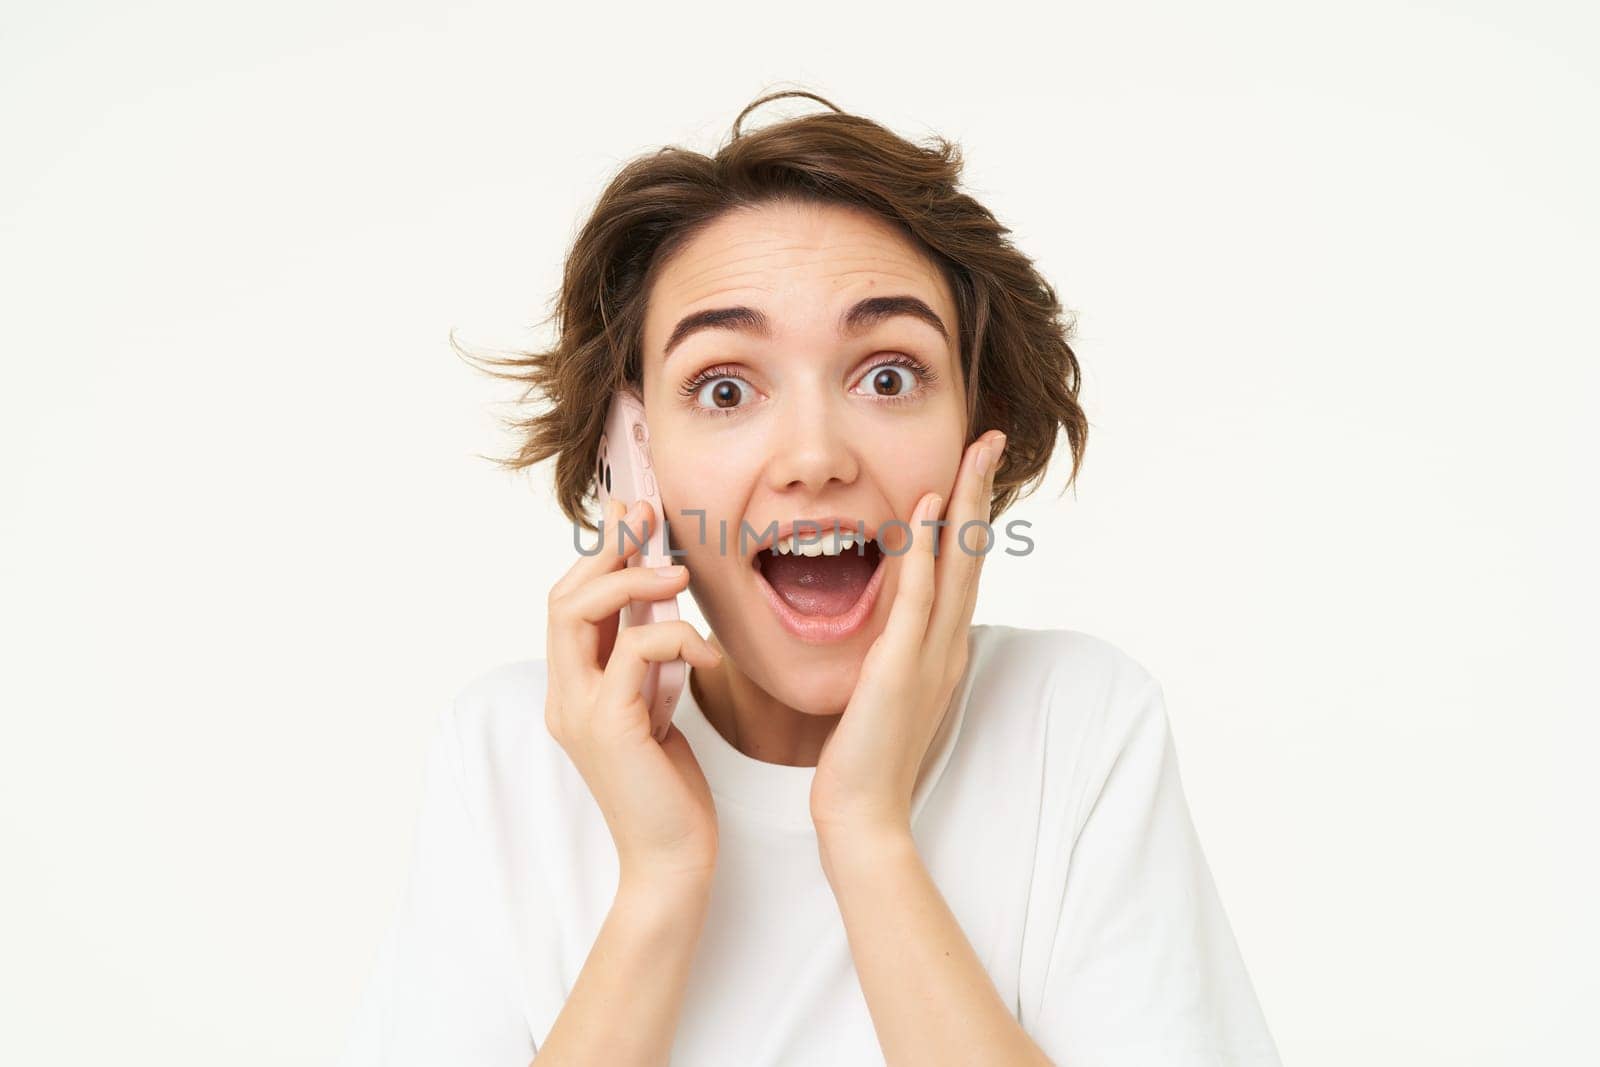 Portrait of woman with surprised face, answers phone call and looks excited, amazed by big news, stands over white background.